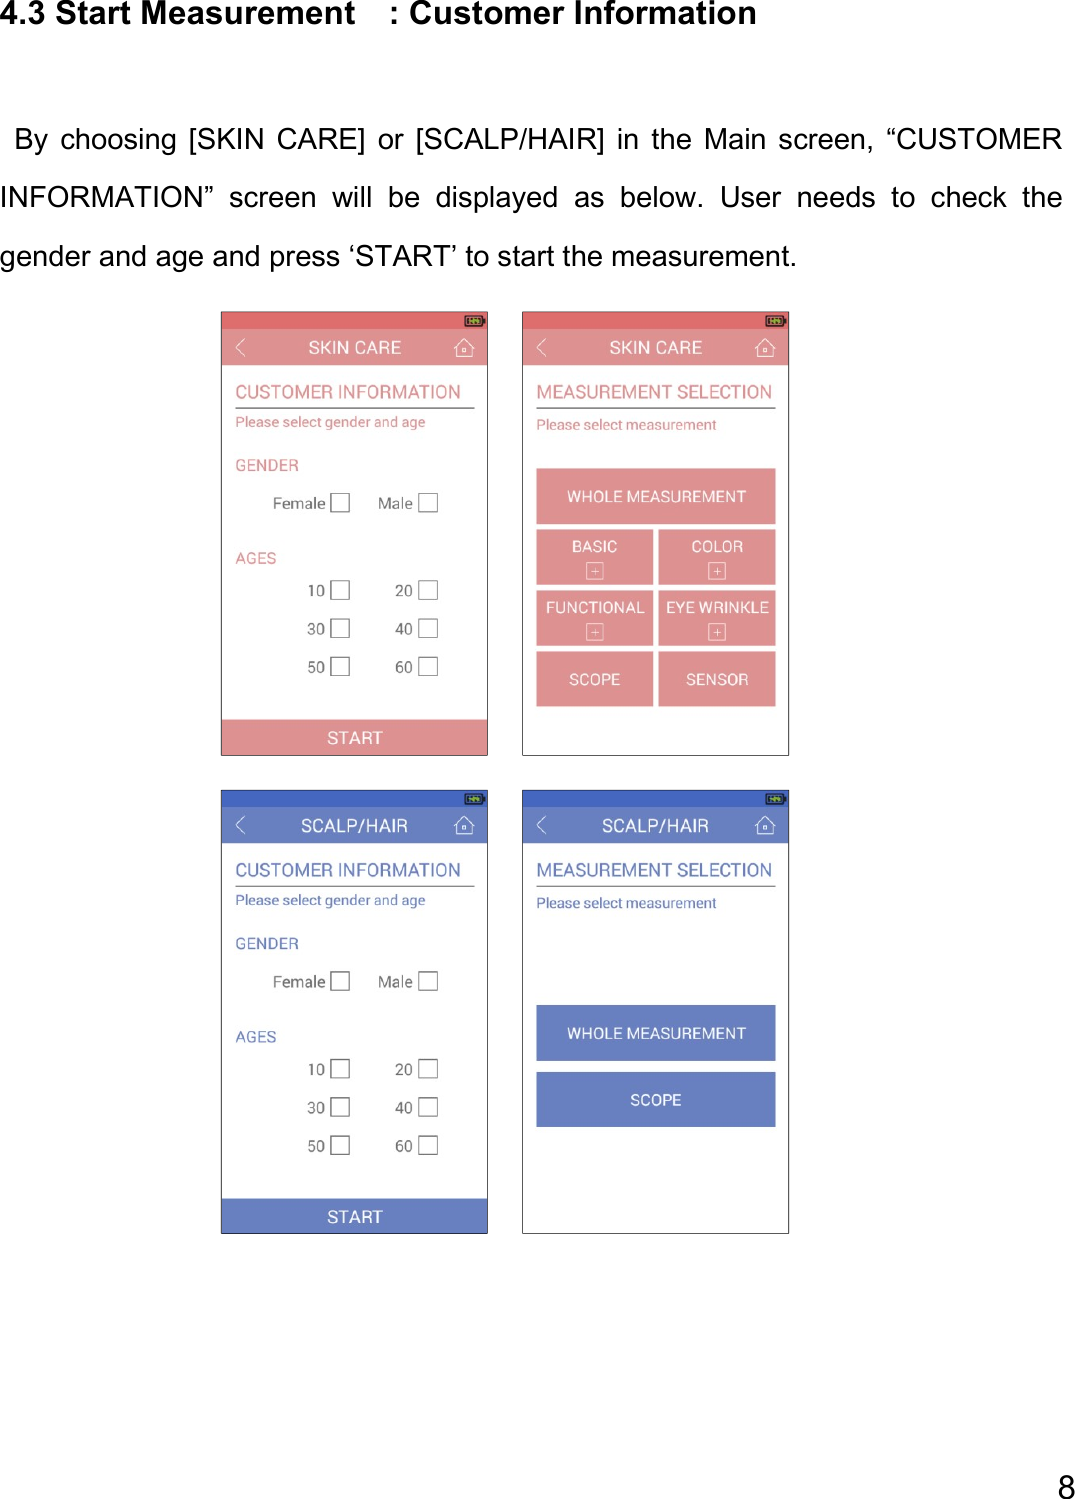  8  4.3 Start Measurement    : Customer Information    By  choosing [SKIN  CARE]  or  [SCALP/HAIR]  in  the  Main screen,  “CUSTOMER INFORMATION”  screen  will  be  displayed  as  below.  User  needs  to  check  the gender and age and press ‘START’ to start the measurement.                                                                          